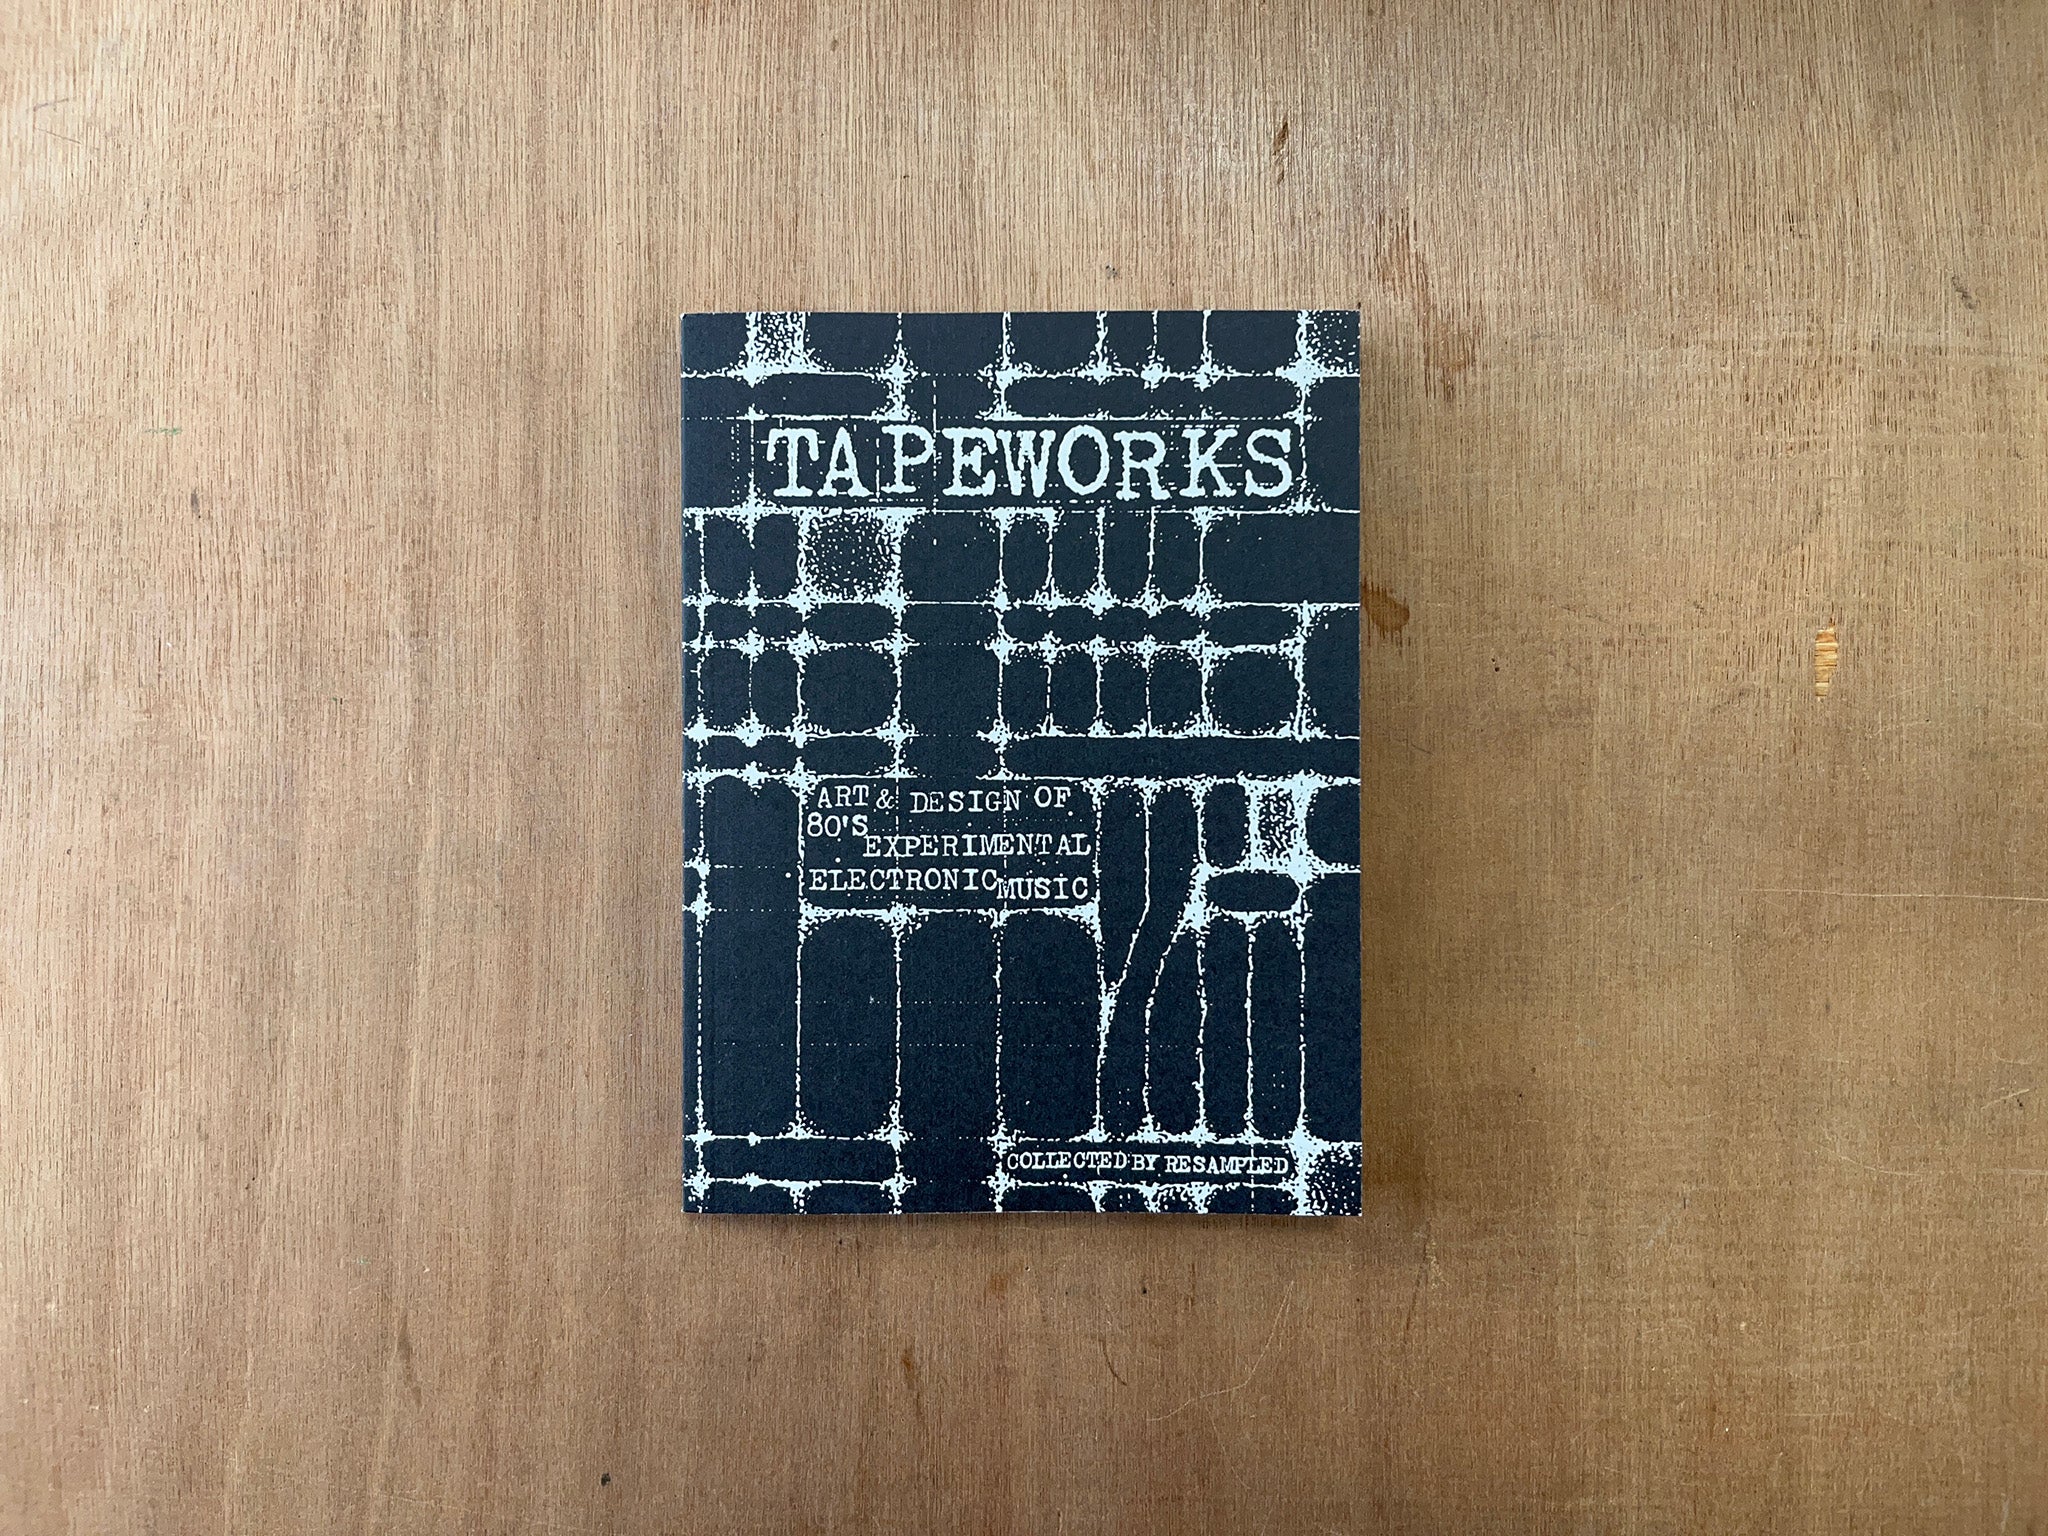 TAPEWORKS - ART & DESIGN OF 80S EXPERIMENTAL ELECTRONIC MUSIC